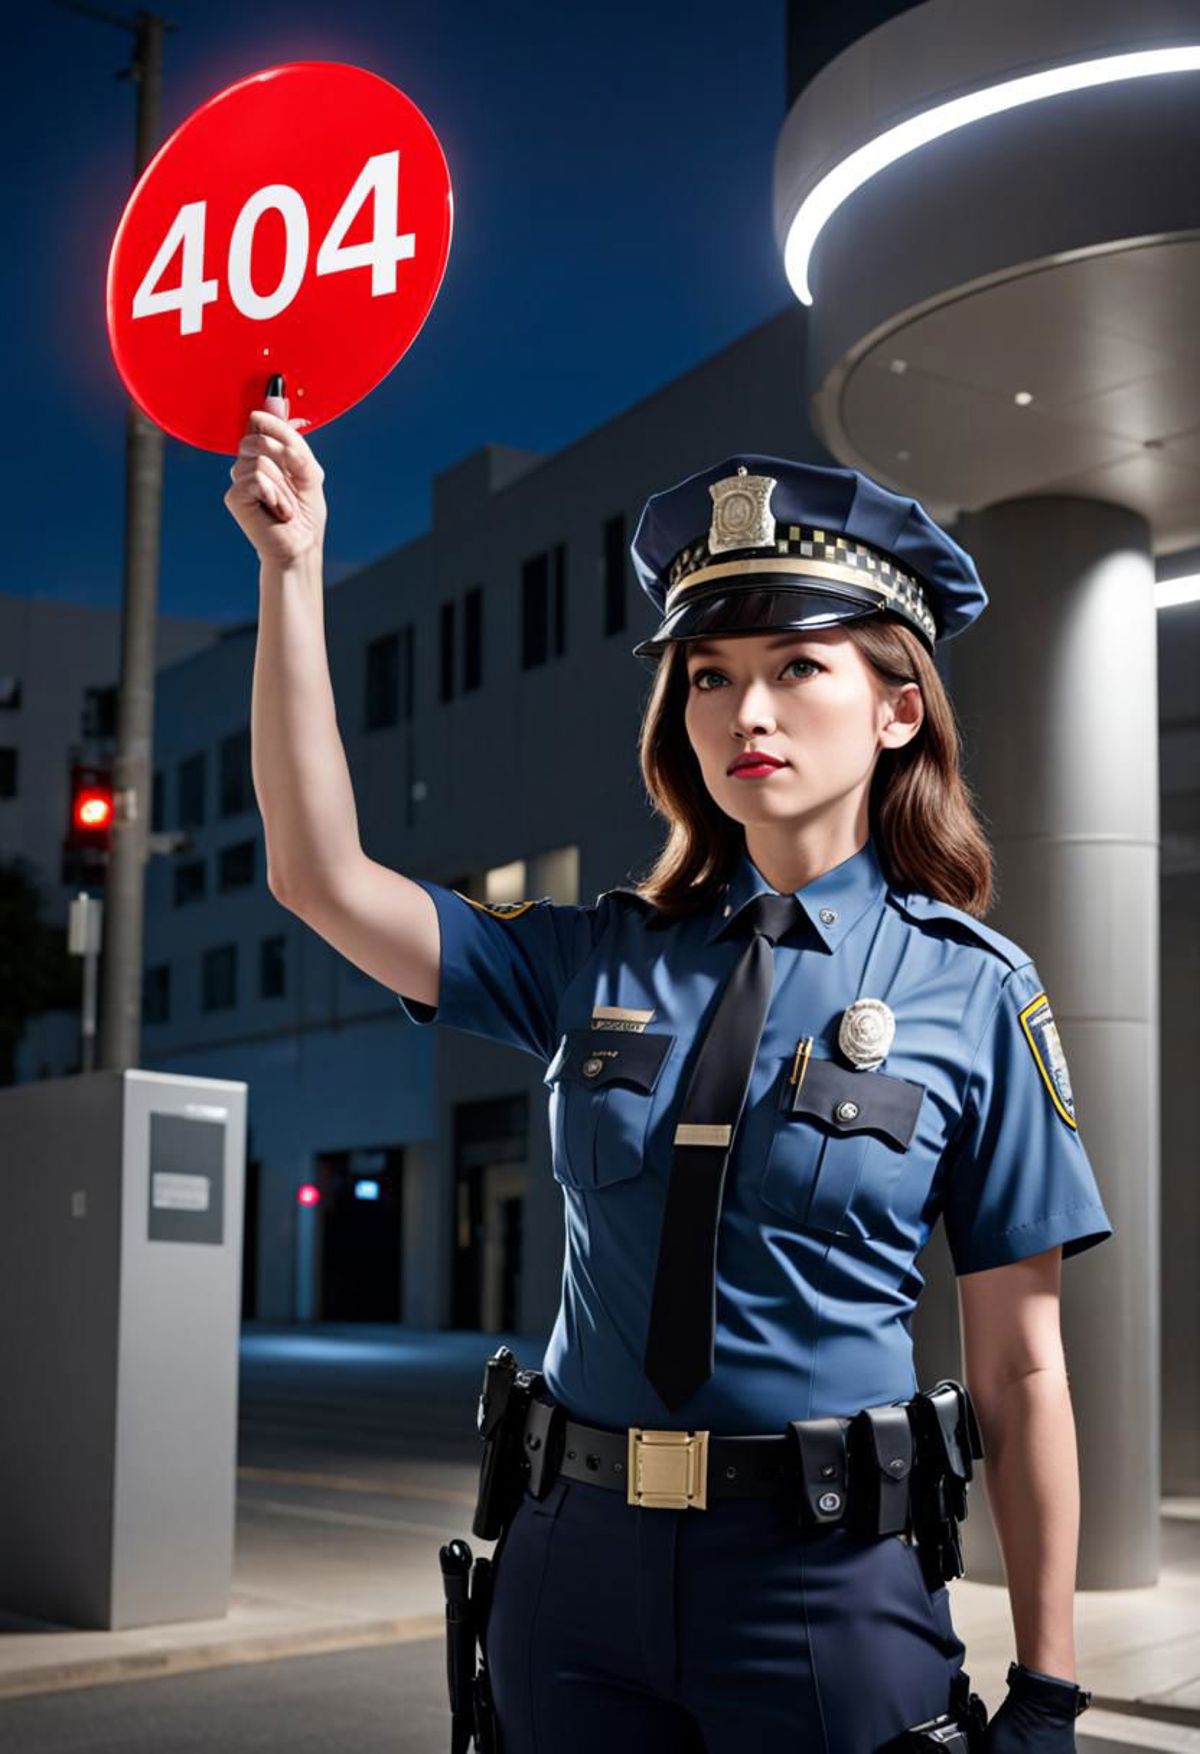 A police officer holding a stop sign.